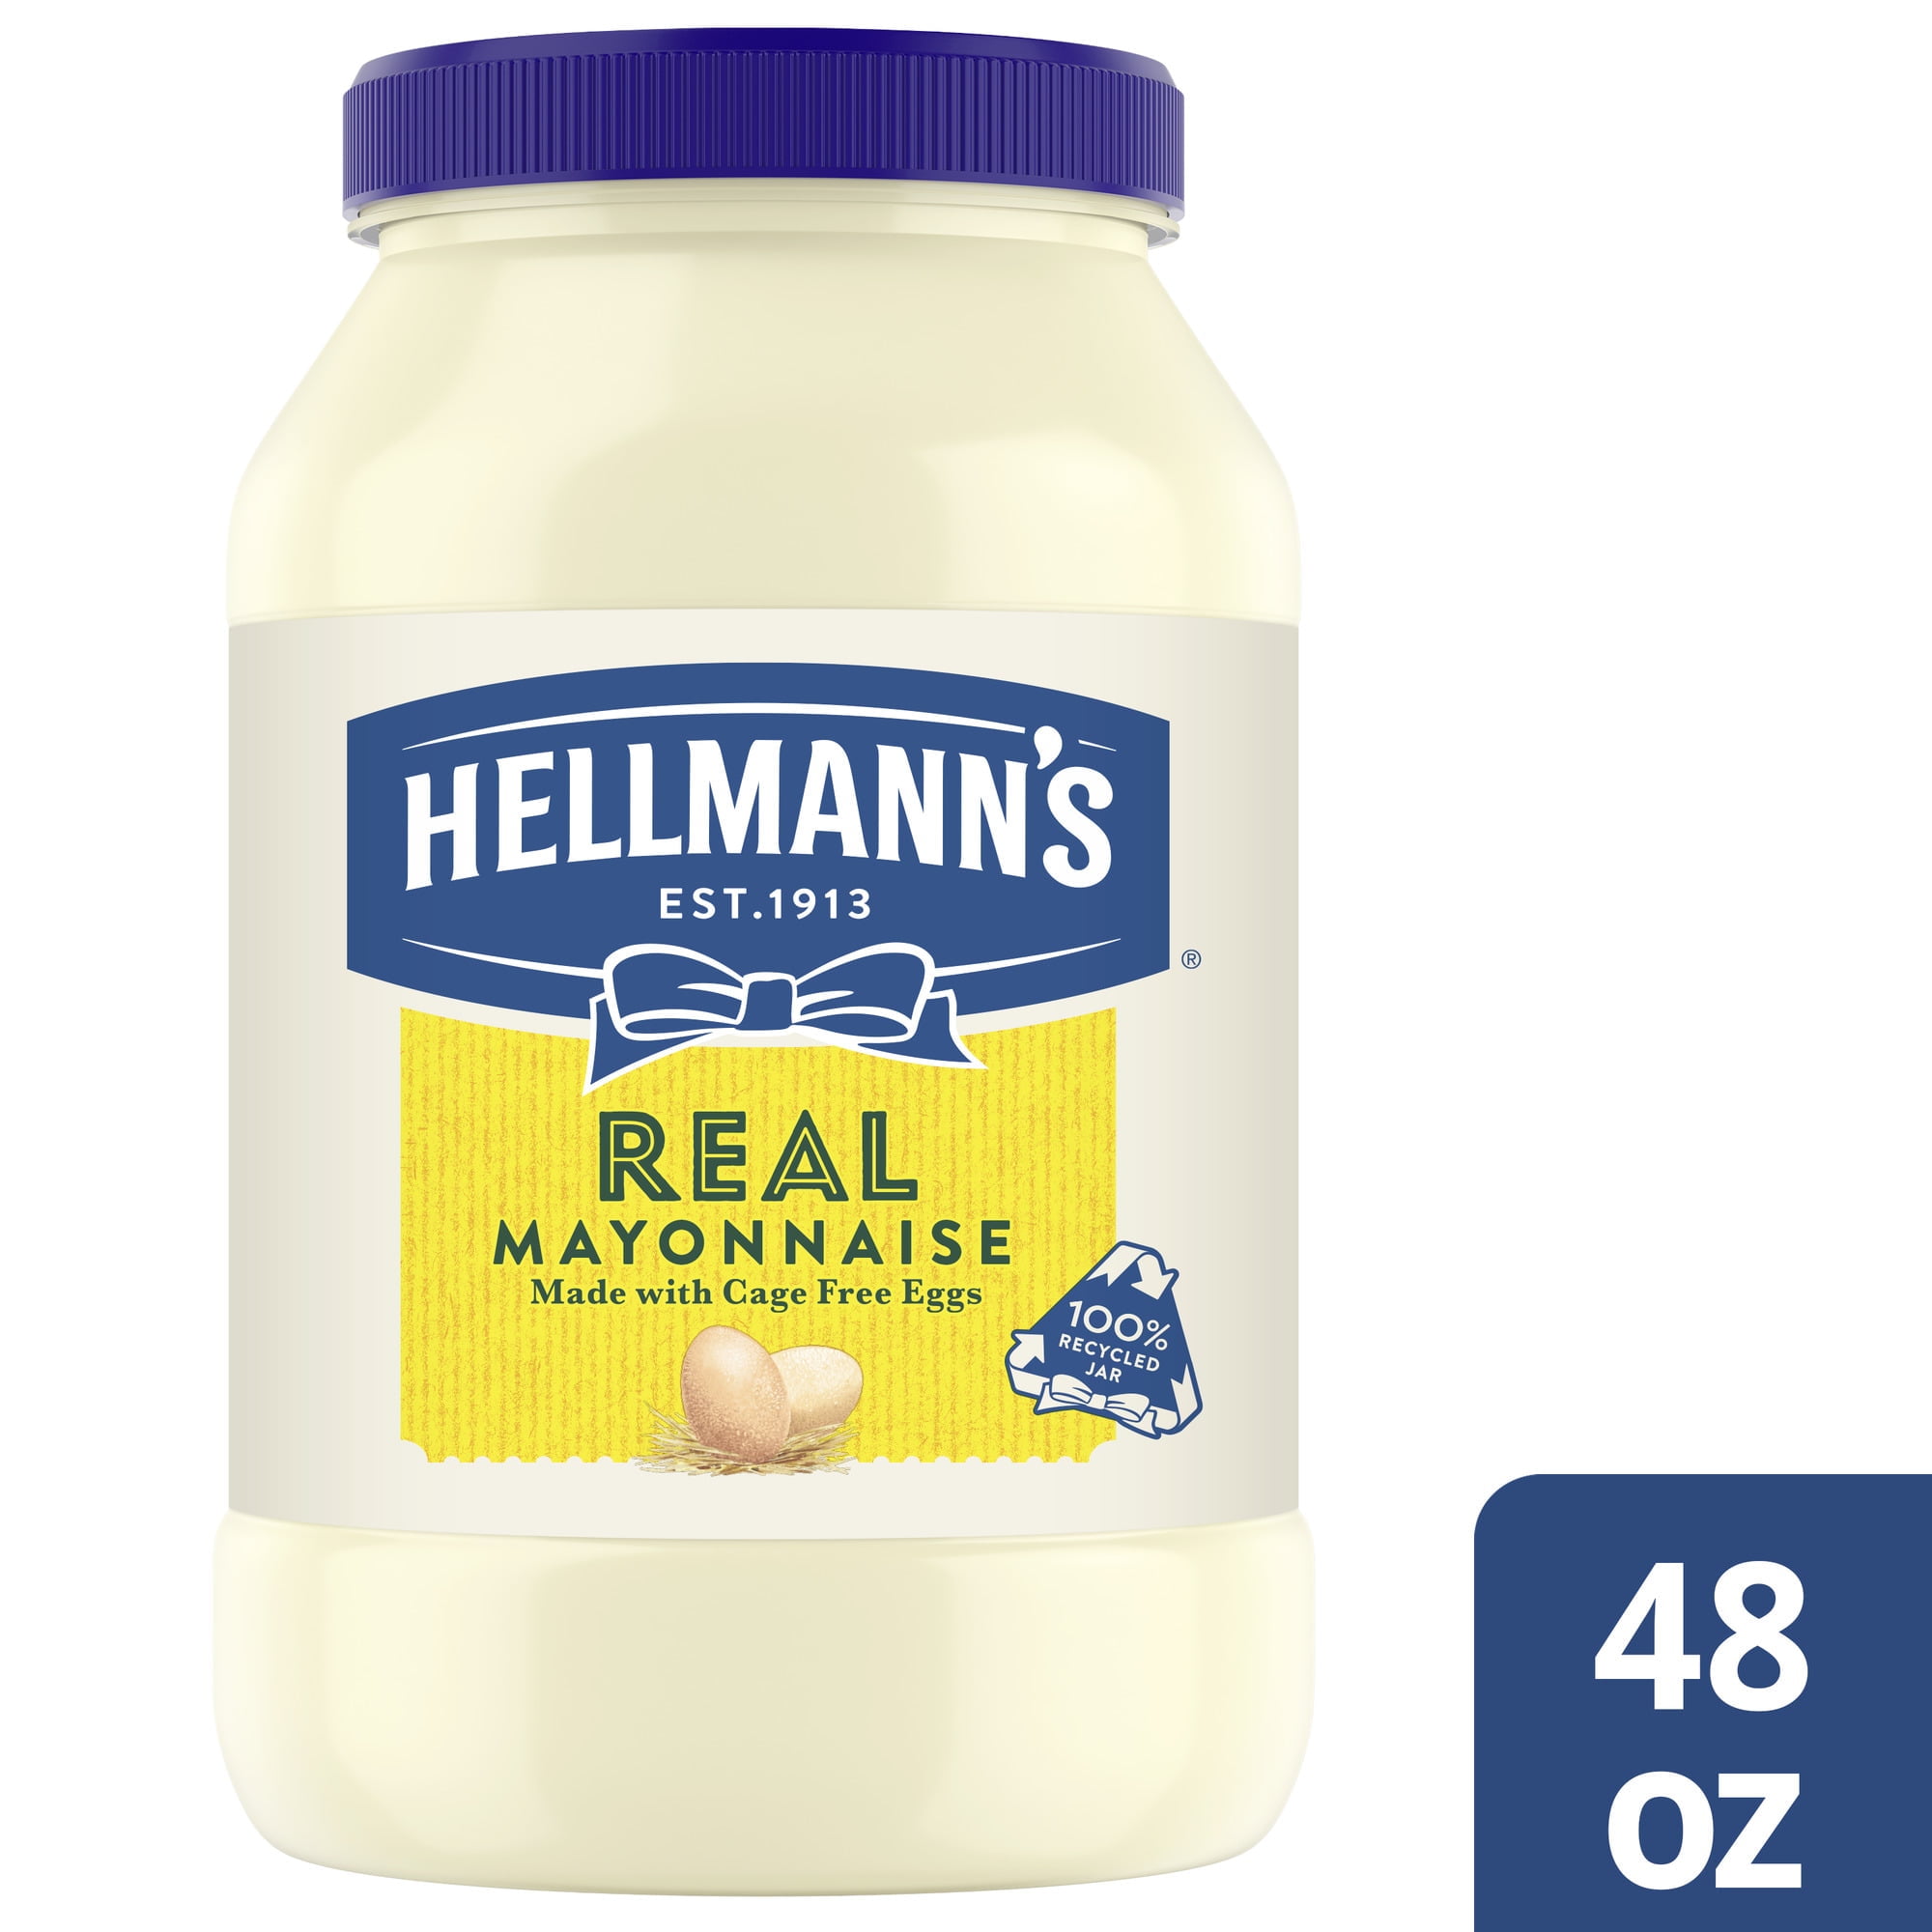 Hellmann-s-Made-with-Cage-Free-Eggs-Real-Mayonnaise-48-fl-oz-Jar_67225de2-6075-4e3c-818c-f110cfa8d01f.b9796a8635b02ffa0a9ea6b390ed701b.jpeg